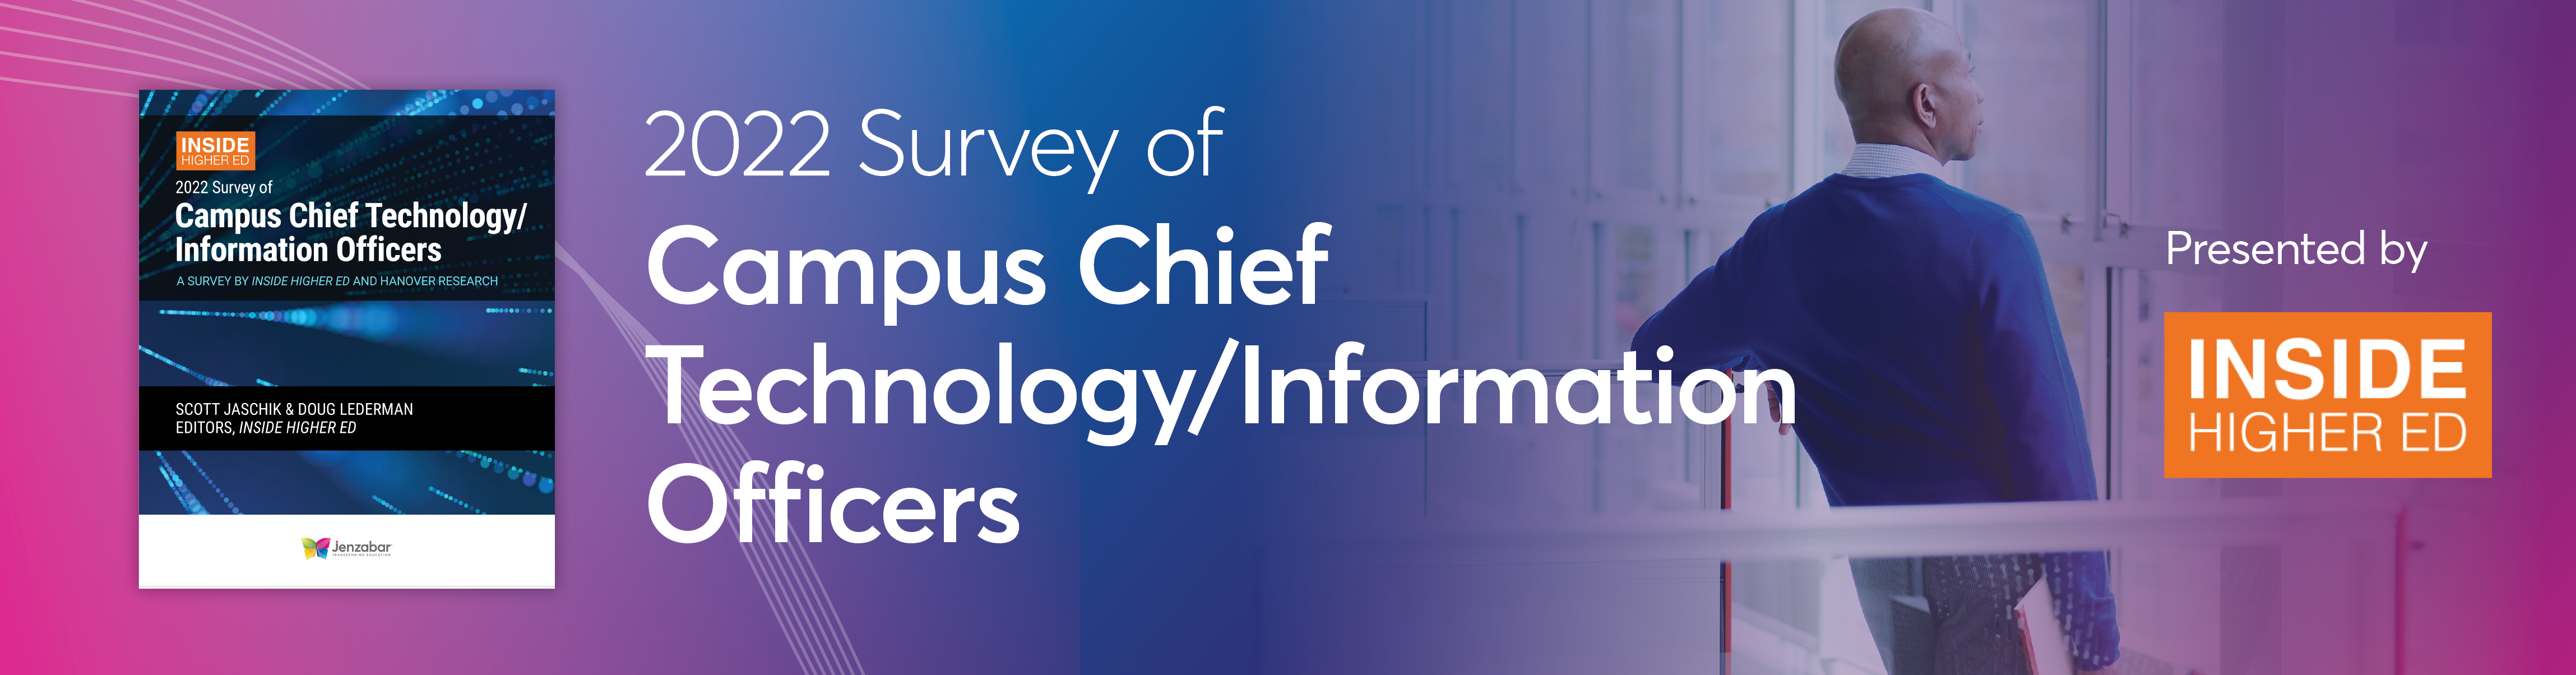 2022 Survey of Campus Chief Technology/Information Officers